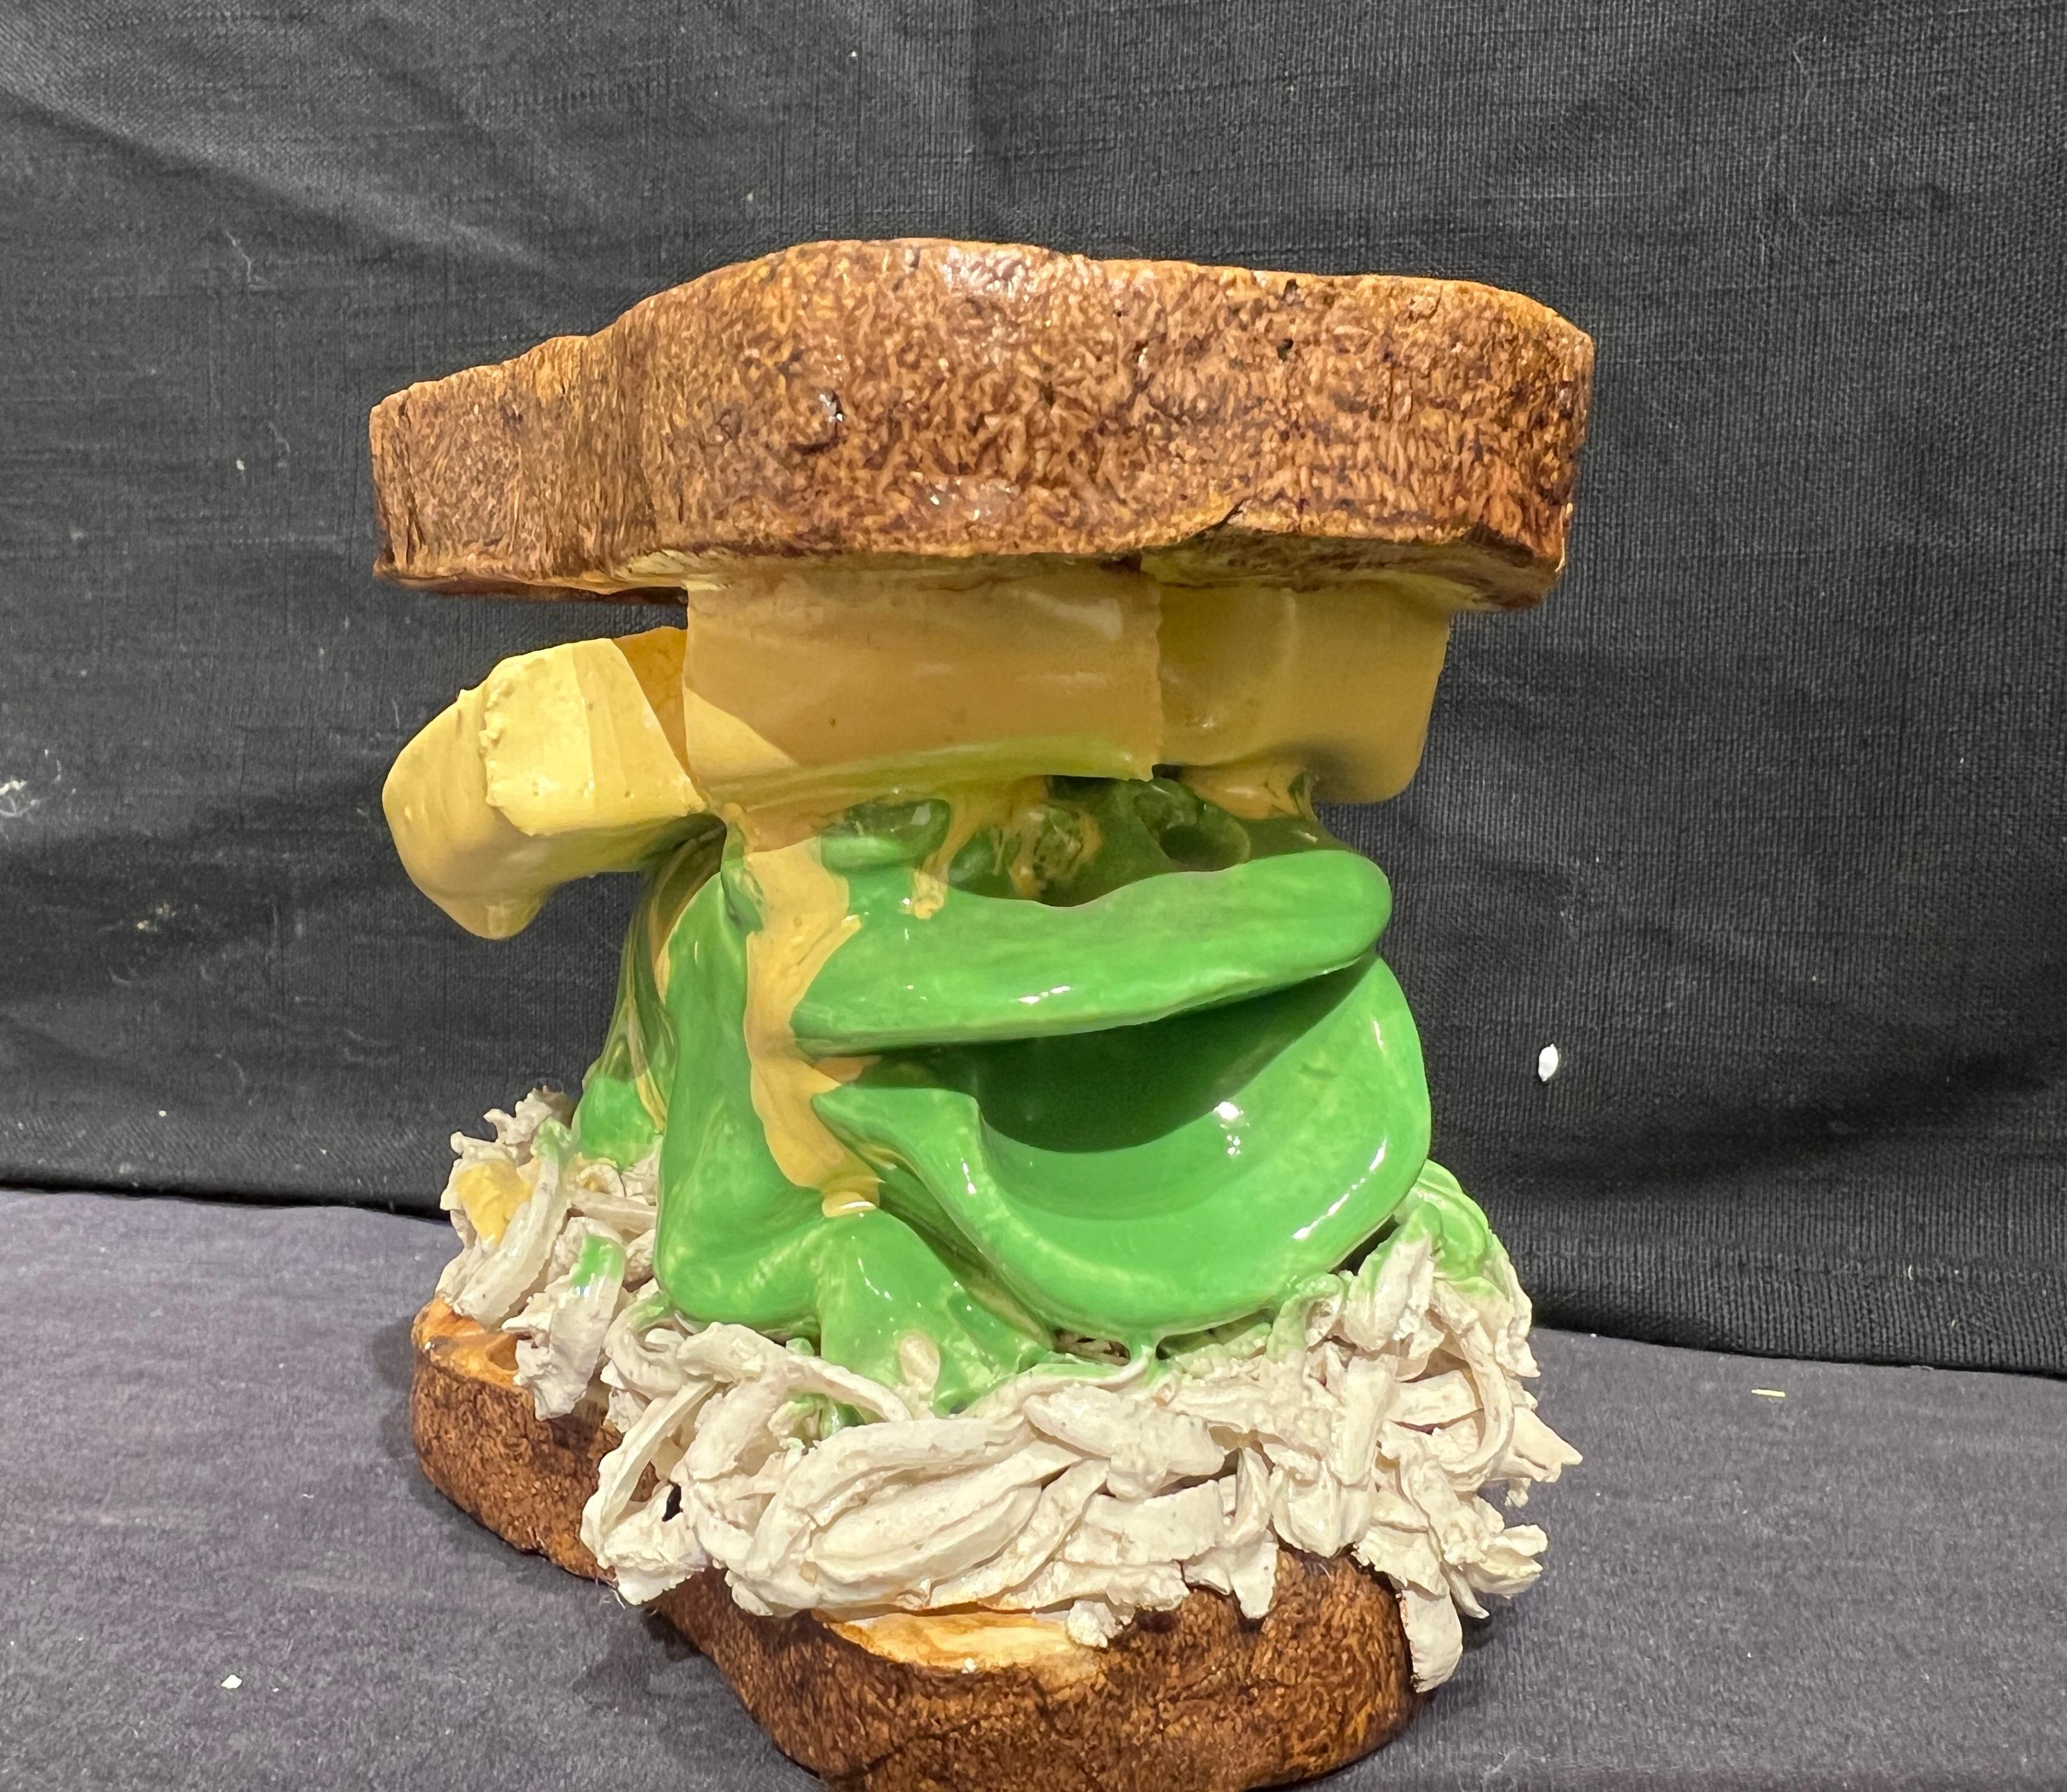 David Gilhooly Still-Life Sculpture - Frog and Swiss on Rye